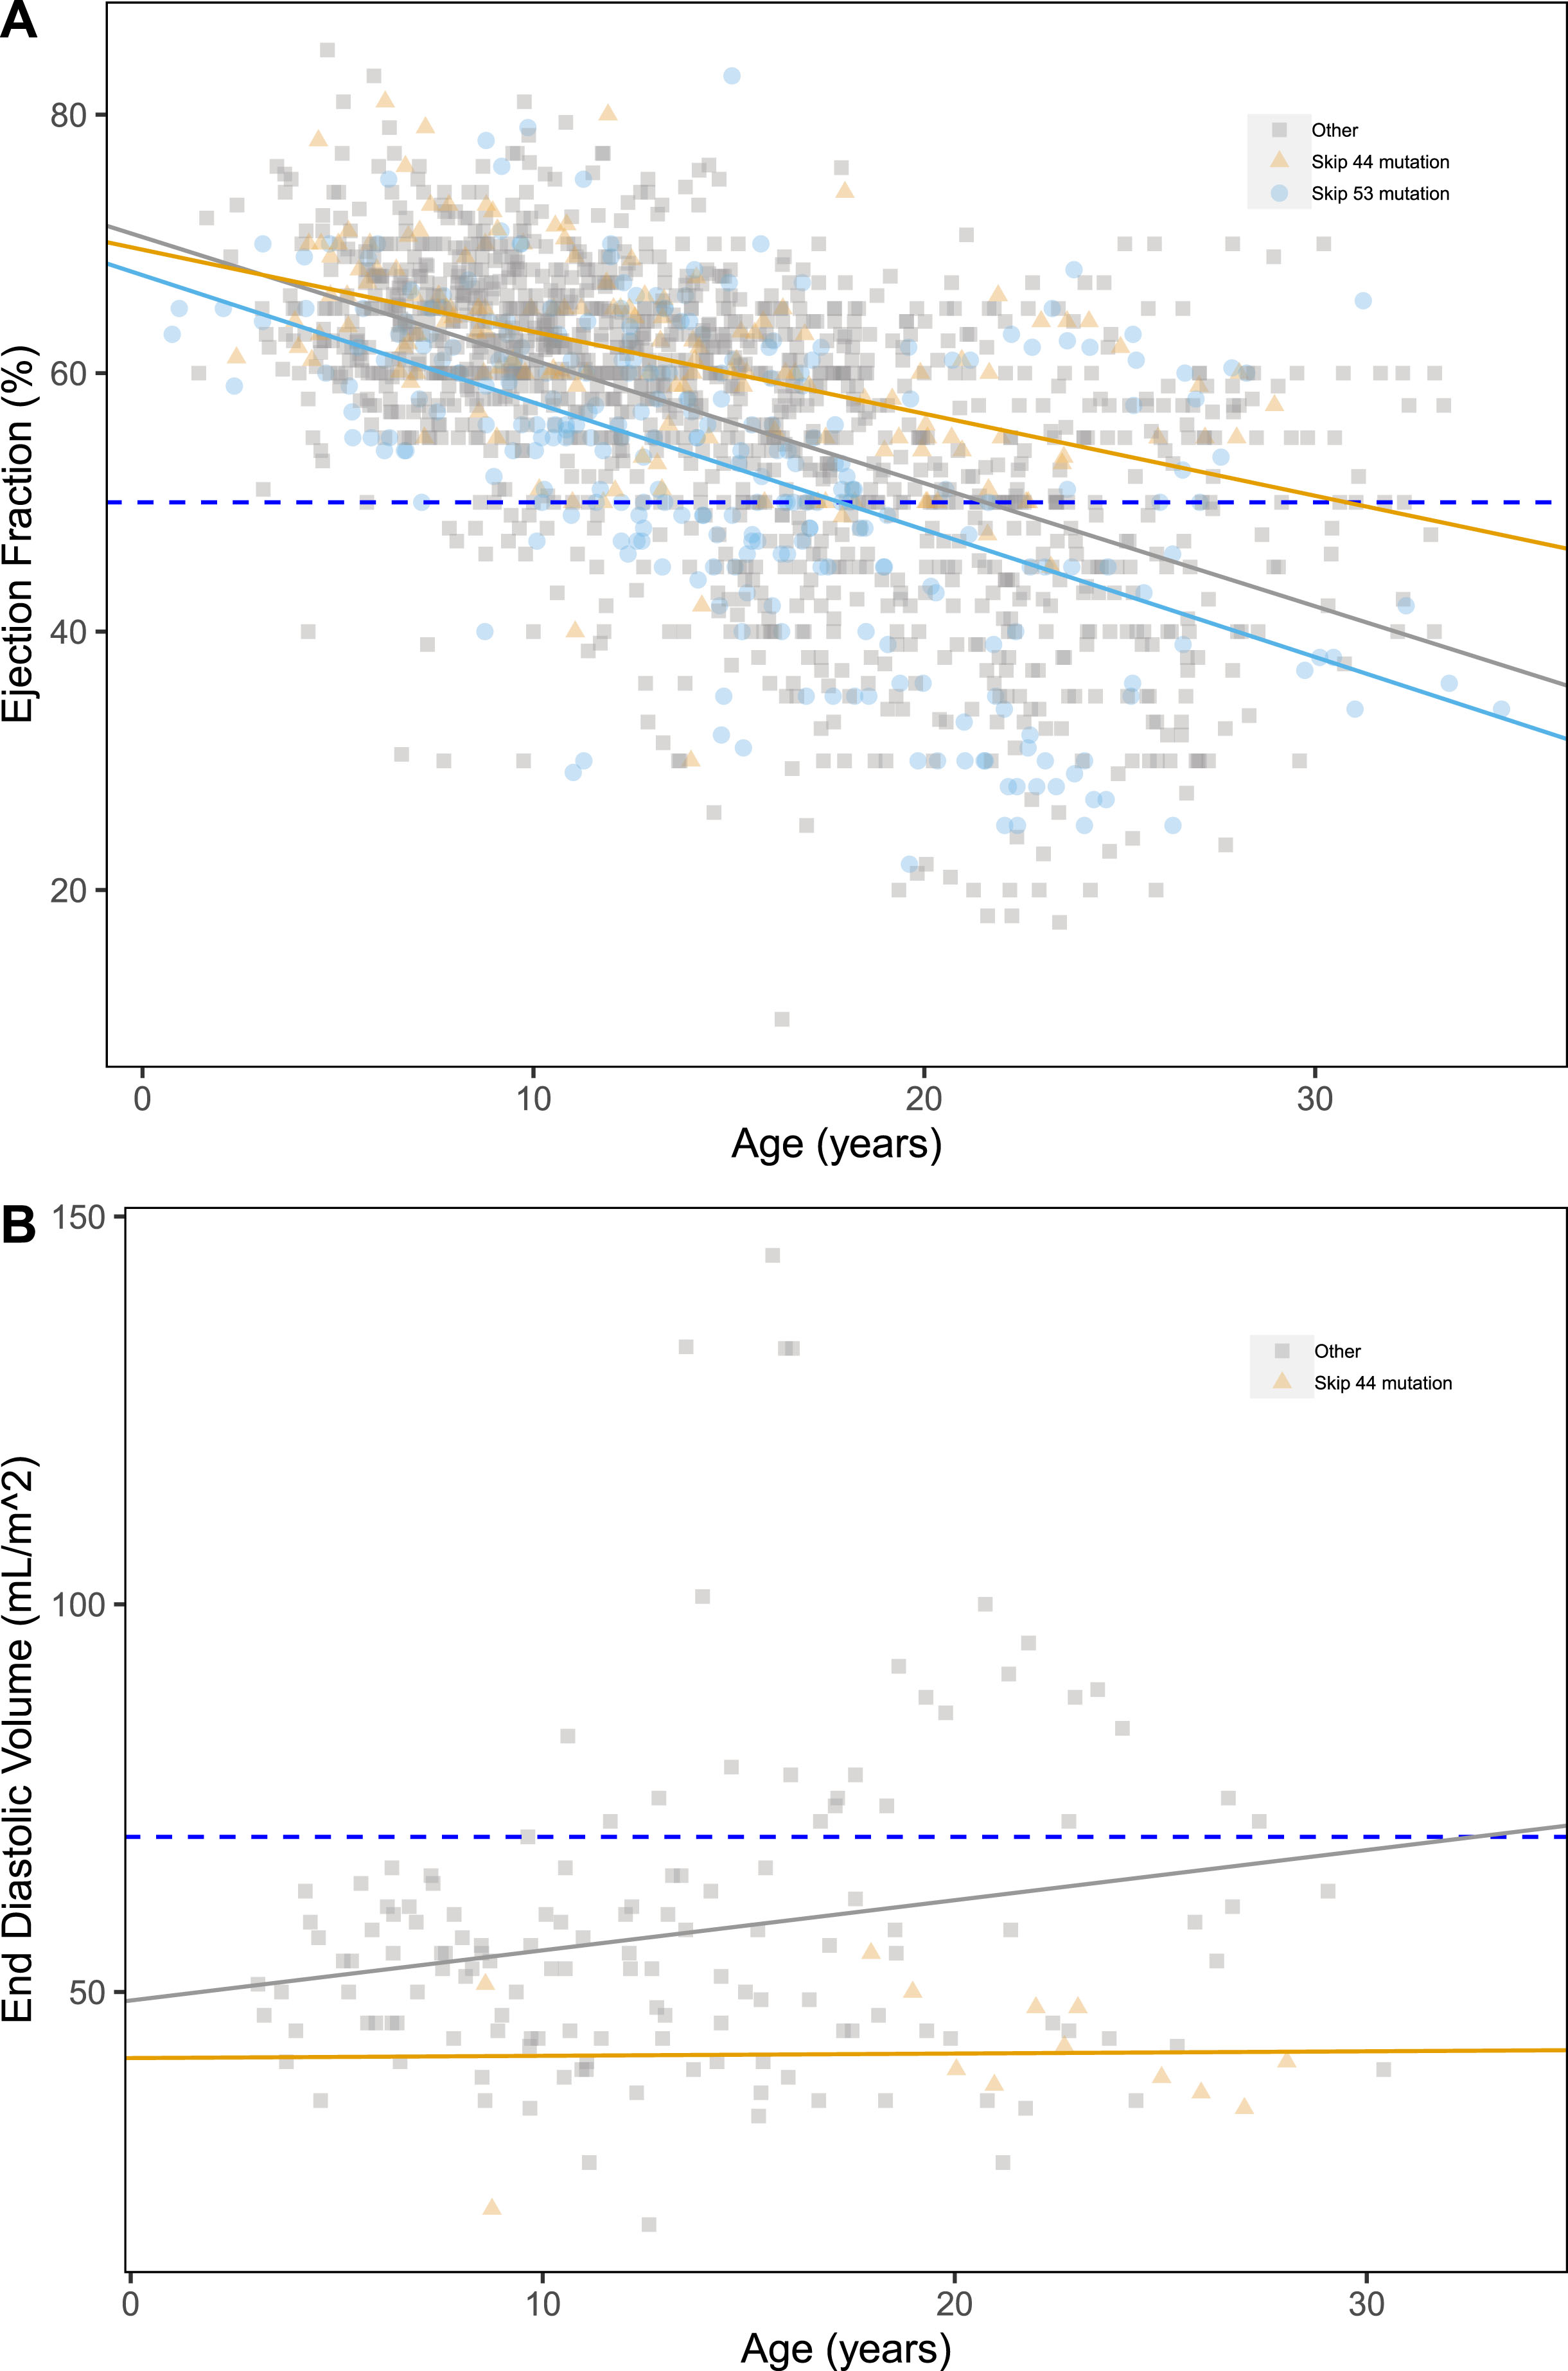 Scatter plots of ejection fraction (%) (A), end diastolic volume (mL/m2) (B) by age, grouped by LTBP4 genotype. Pathological thresholds are marked by the dashed lines.